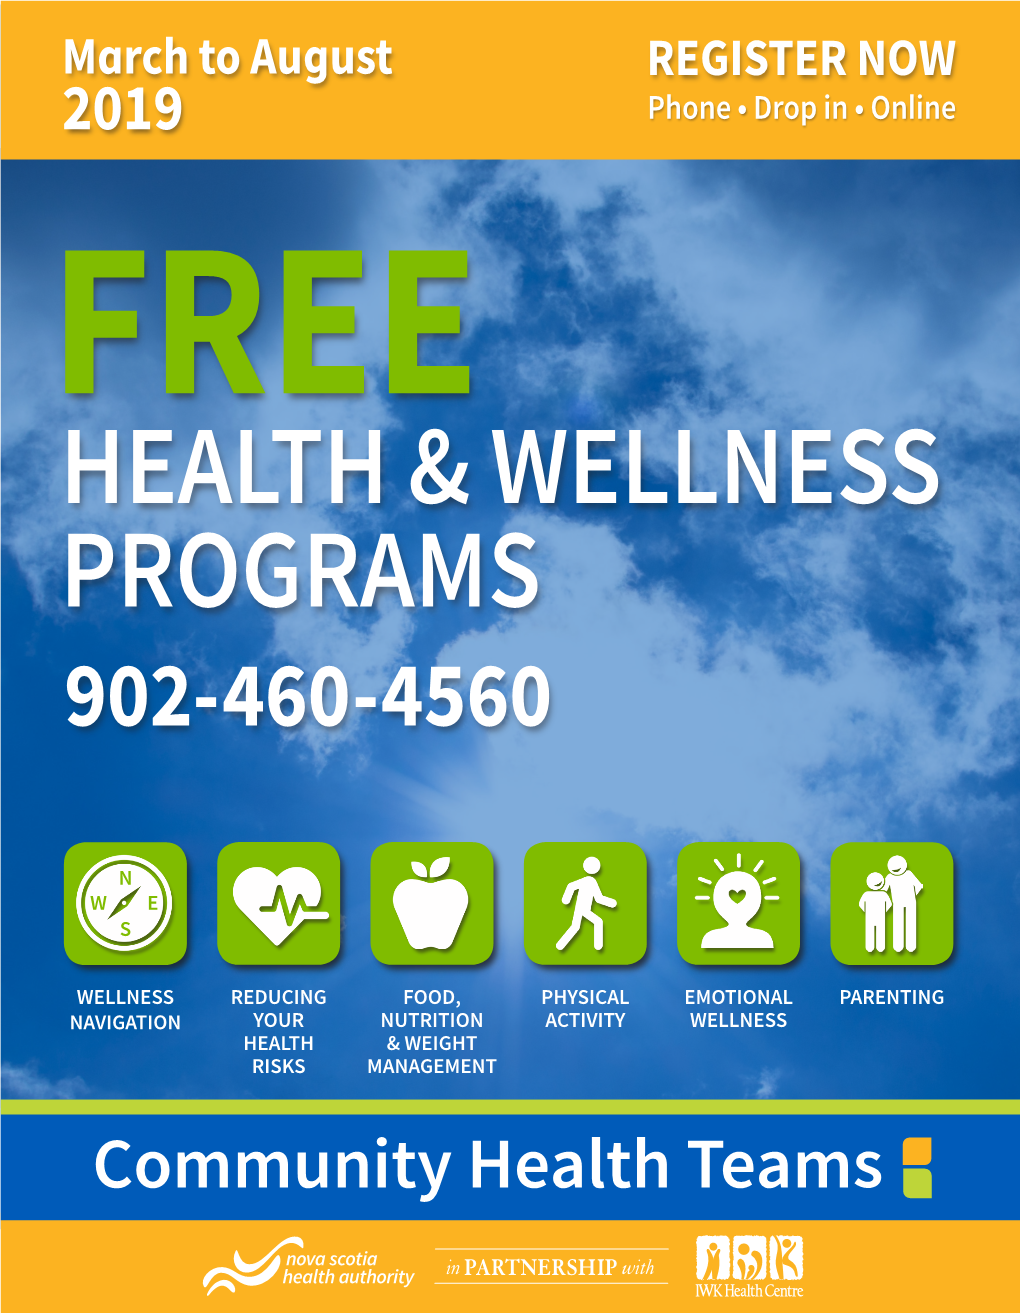 FREE Wellness Programs and Services in Your Community